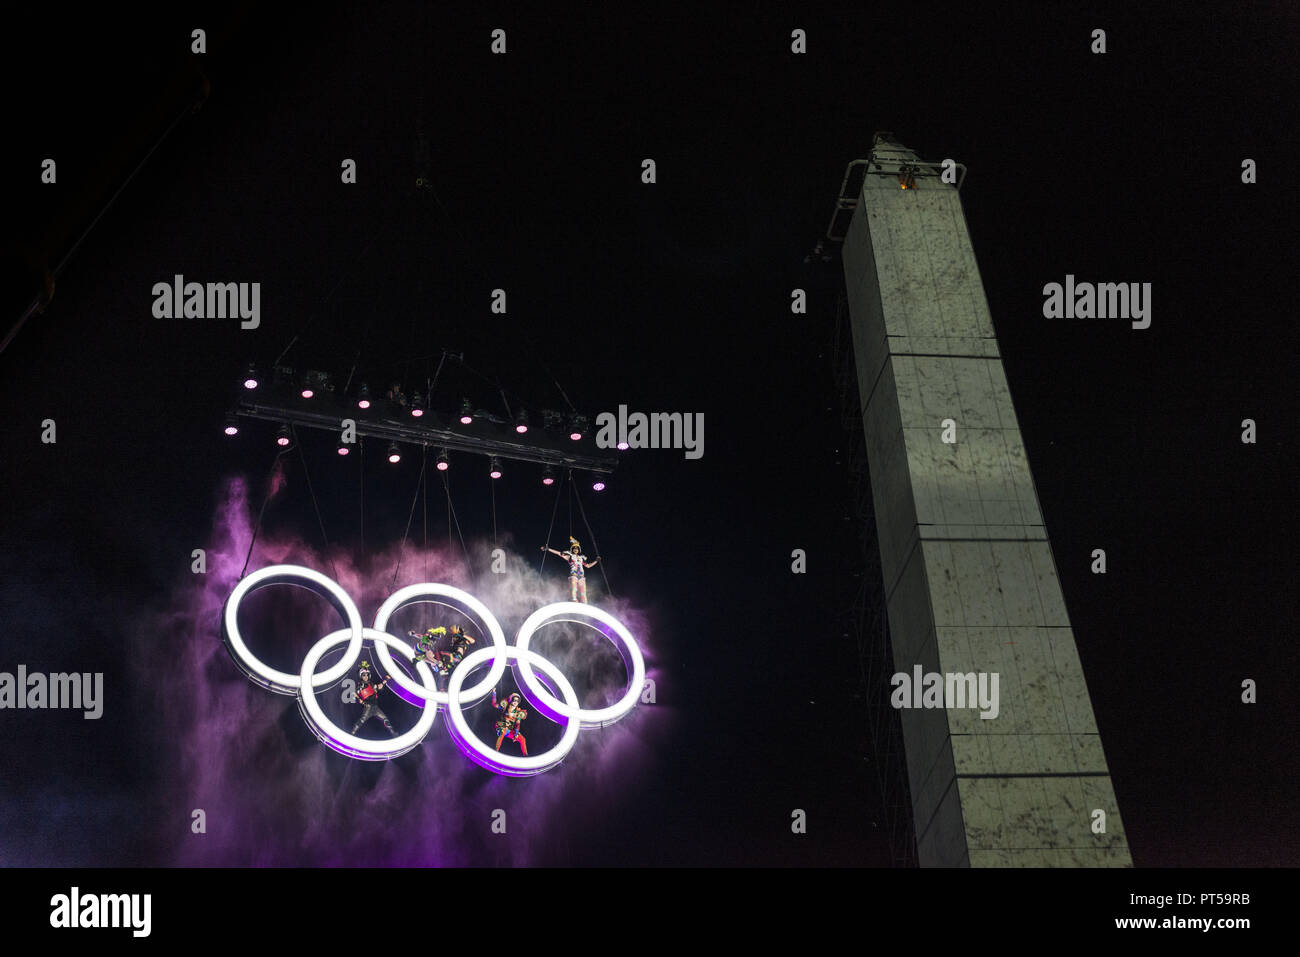 City Of Buenos Aires, City of Buenos Aires, Argentina. 6th Oct, 2018. SPORTS. 2018, October 6.- City of Buenos Aires, Argentina.- The Opening Ceremony of the Youth Olympic Games Buenos Aires 2018 is held at the Obelisk in City of Buenos Aires, Argentina, on October 6, 2018. The artistic group Fuerza Bruta is in charge of the show. Credit: Julieta Ferrario/ZUMA Wire/Alamy Live News Stock Photo